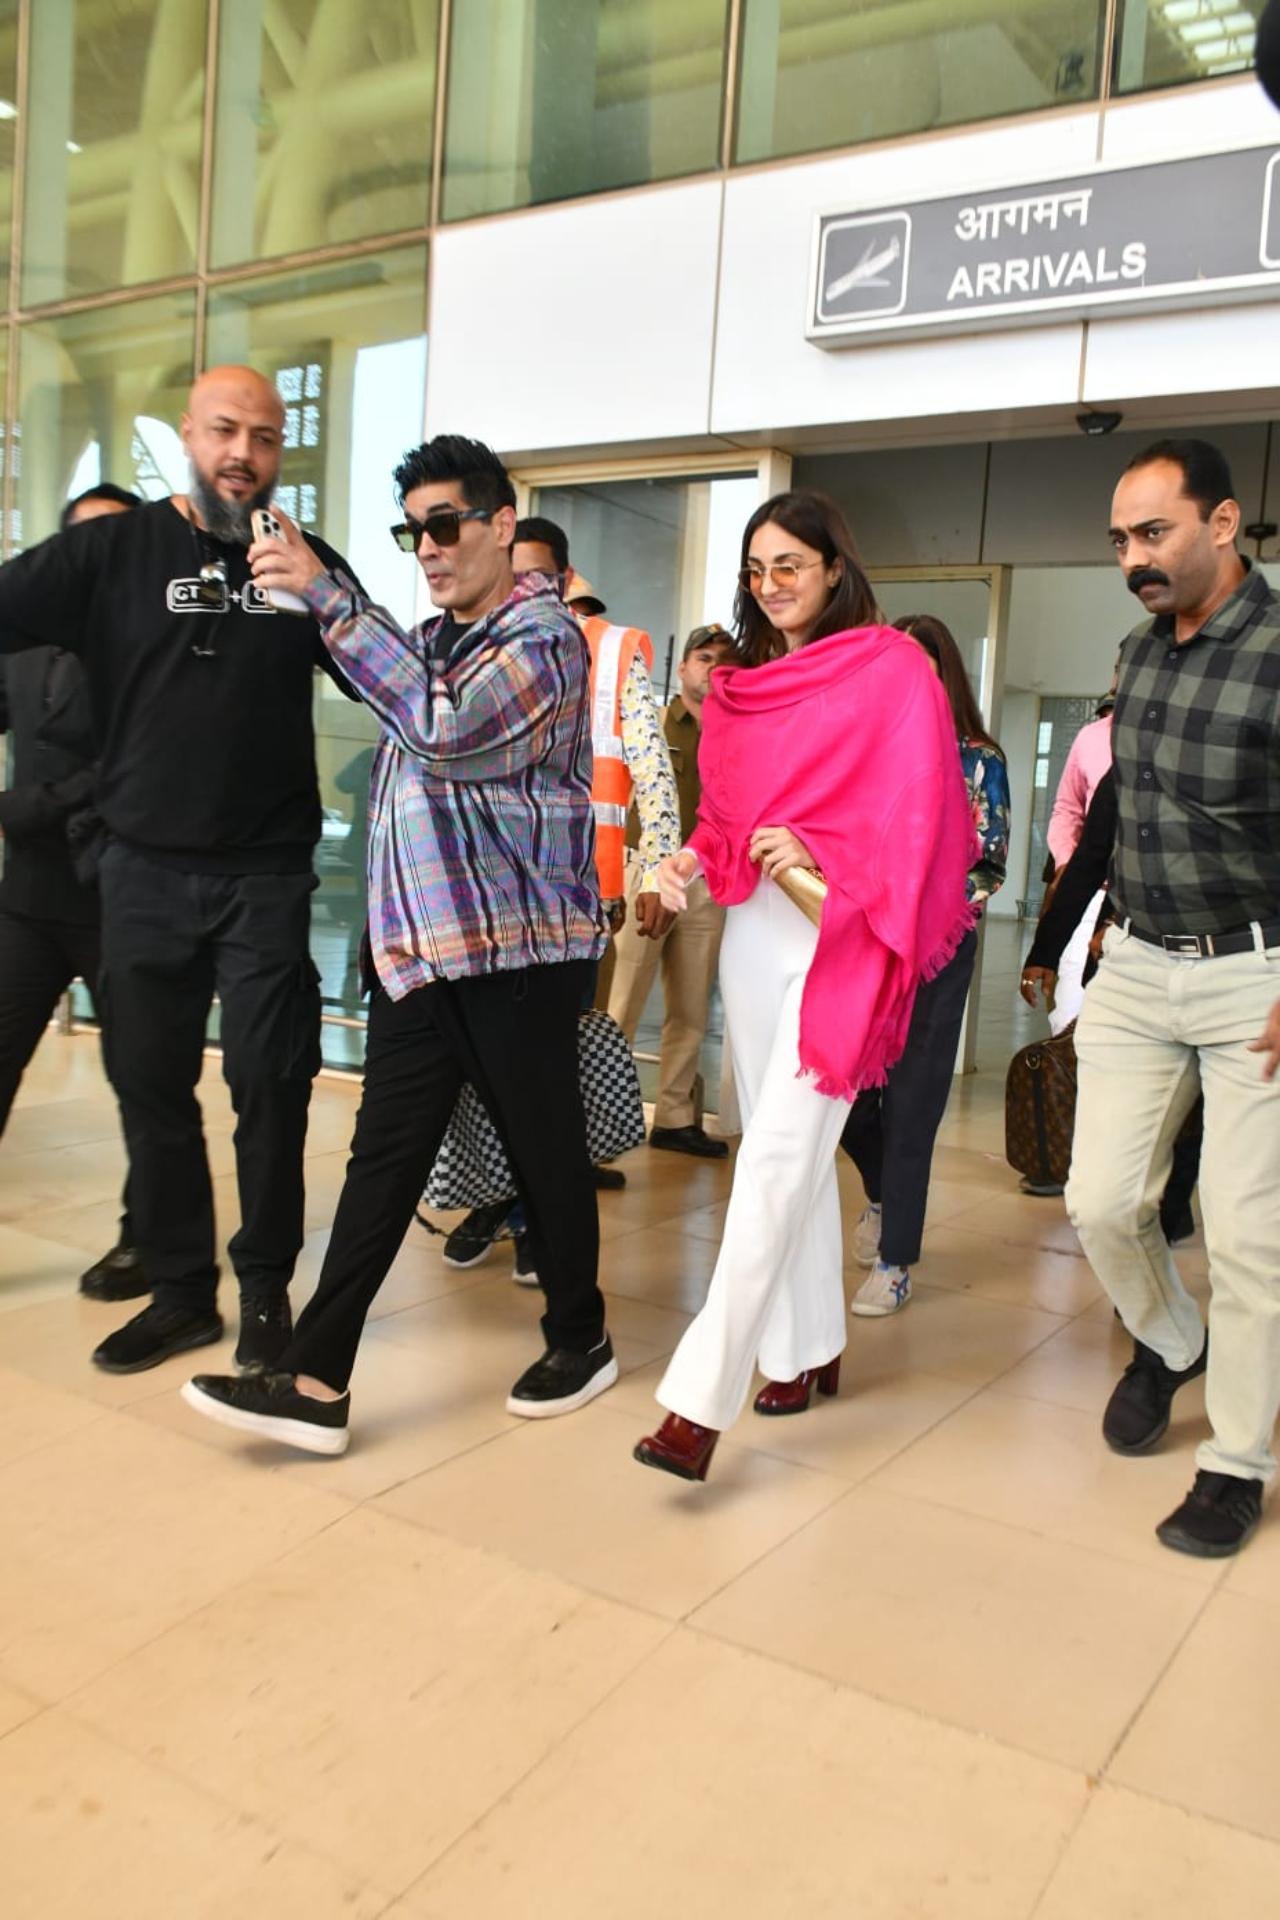 Kiara Advani was spotted at the Mumbai airport on Saturday morning dressed in a white outfit and a pink shawl. By afternoon, the bride-to-be was snapped arriving at Jaisalmer airport